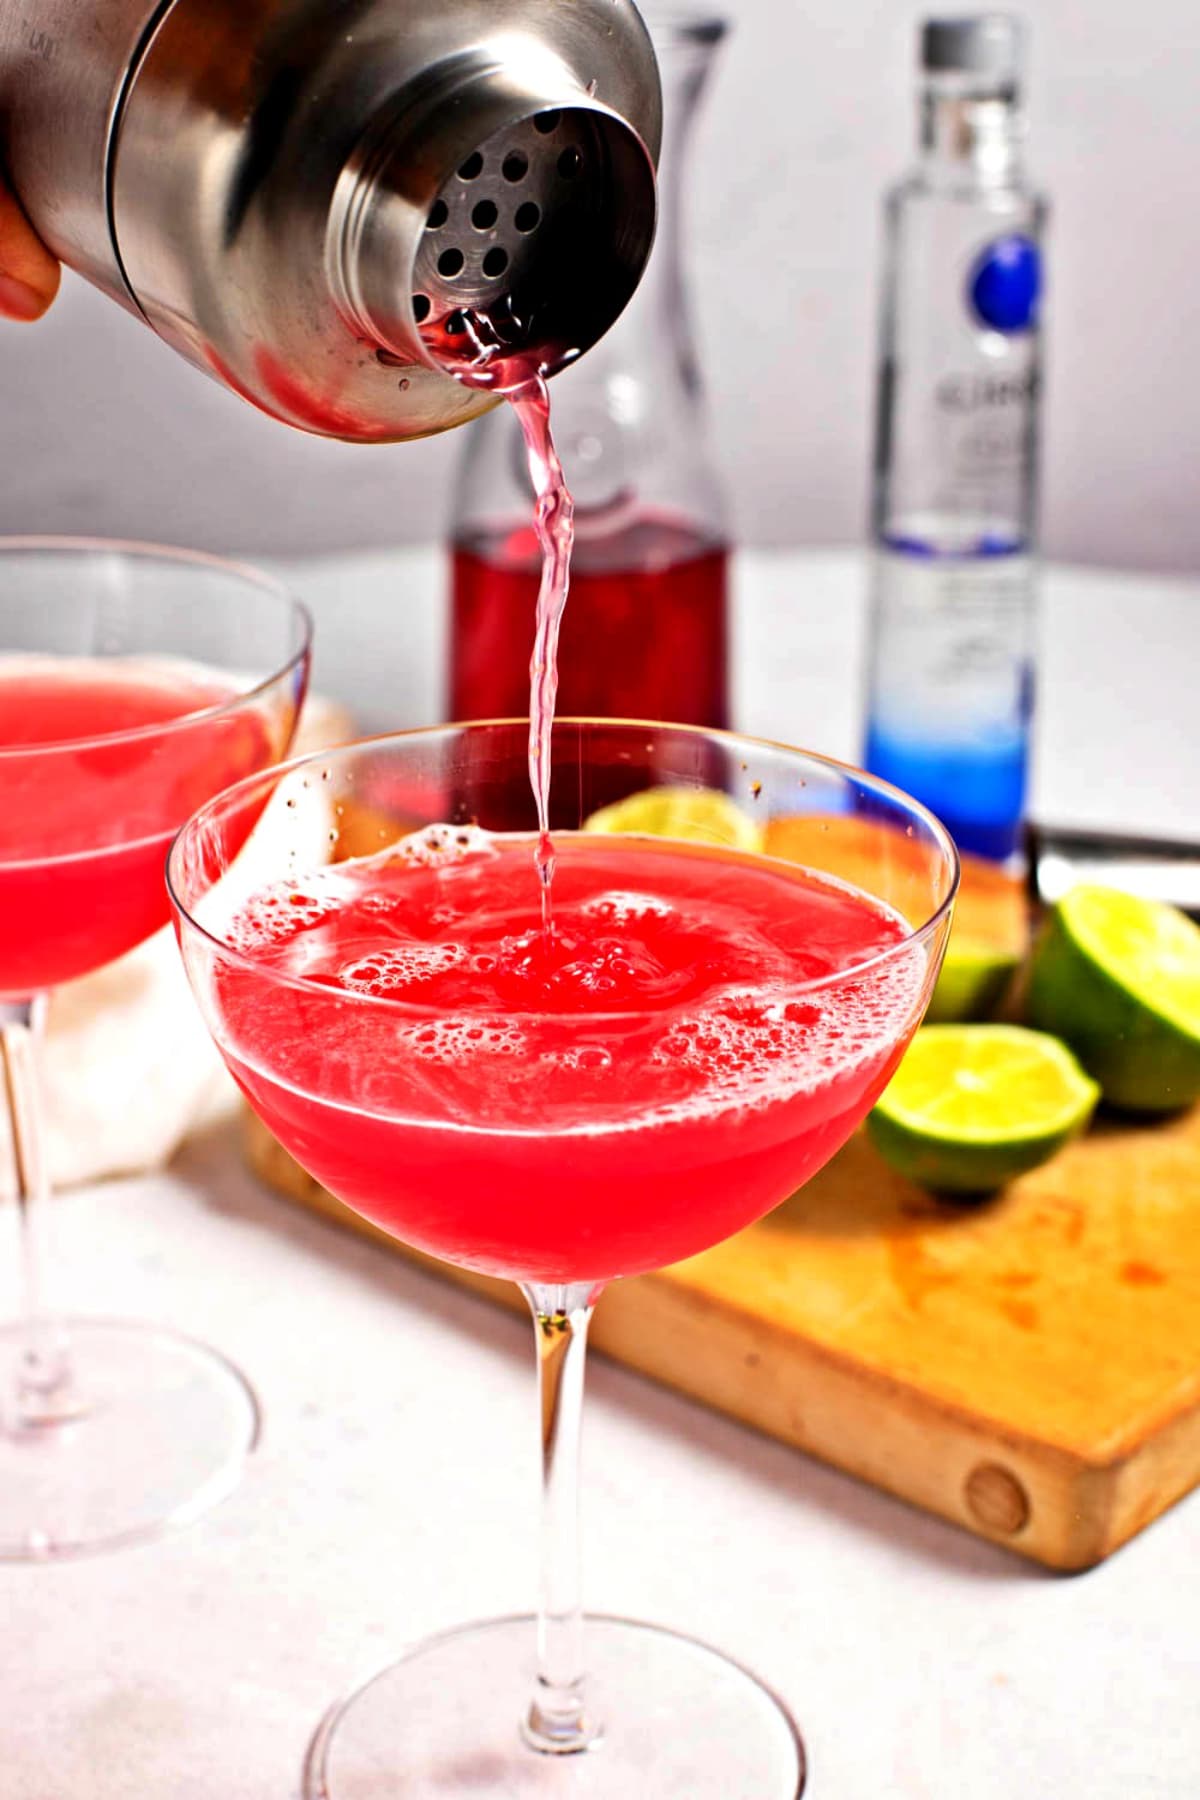 Cosmopolitan Cocktail Recipe (A Classic!) featuring A person pouring a pink cosmopolitan cocktail into a glass, with a full glass and a cutting board with limes behind it